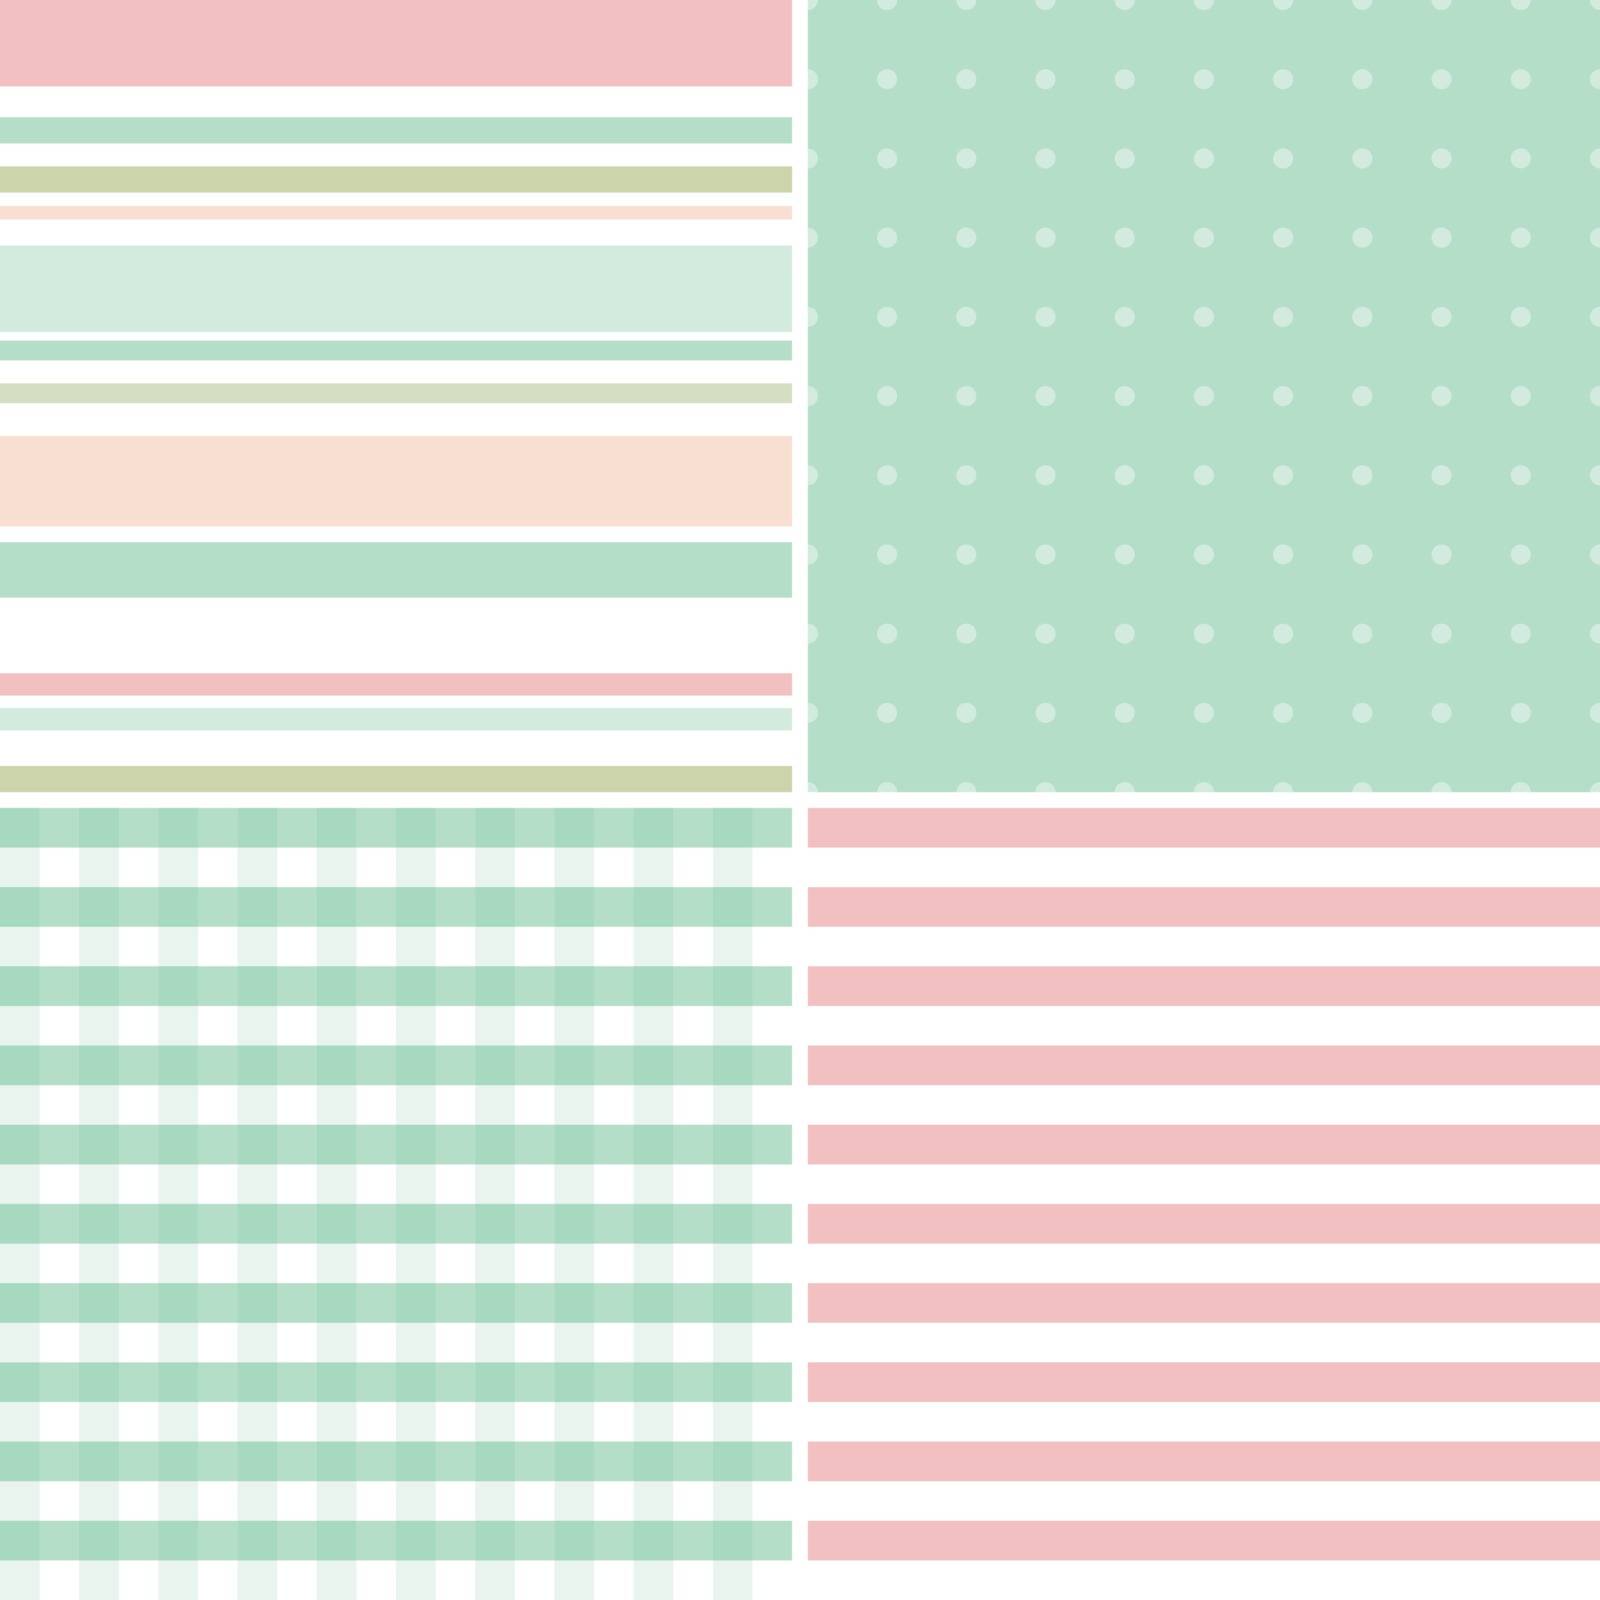 Seamless patterns by nahhan